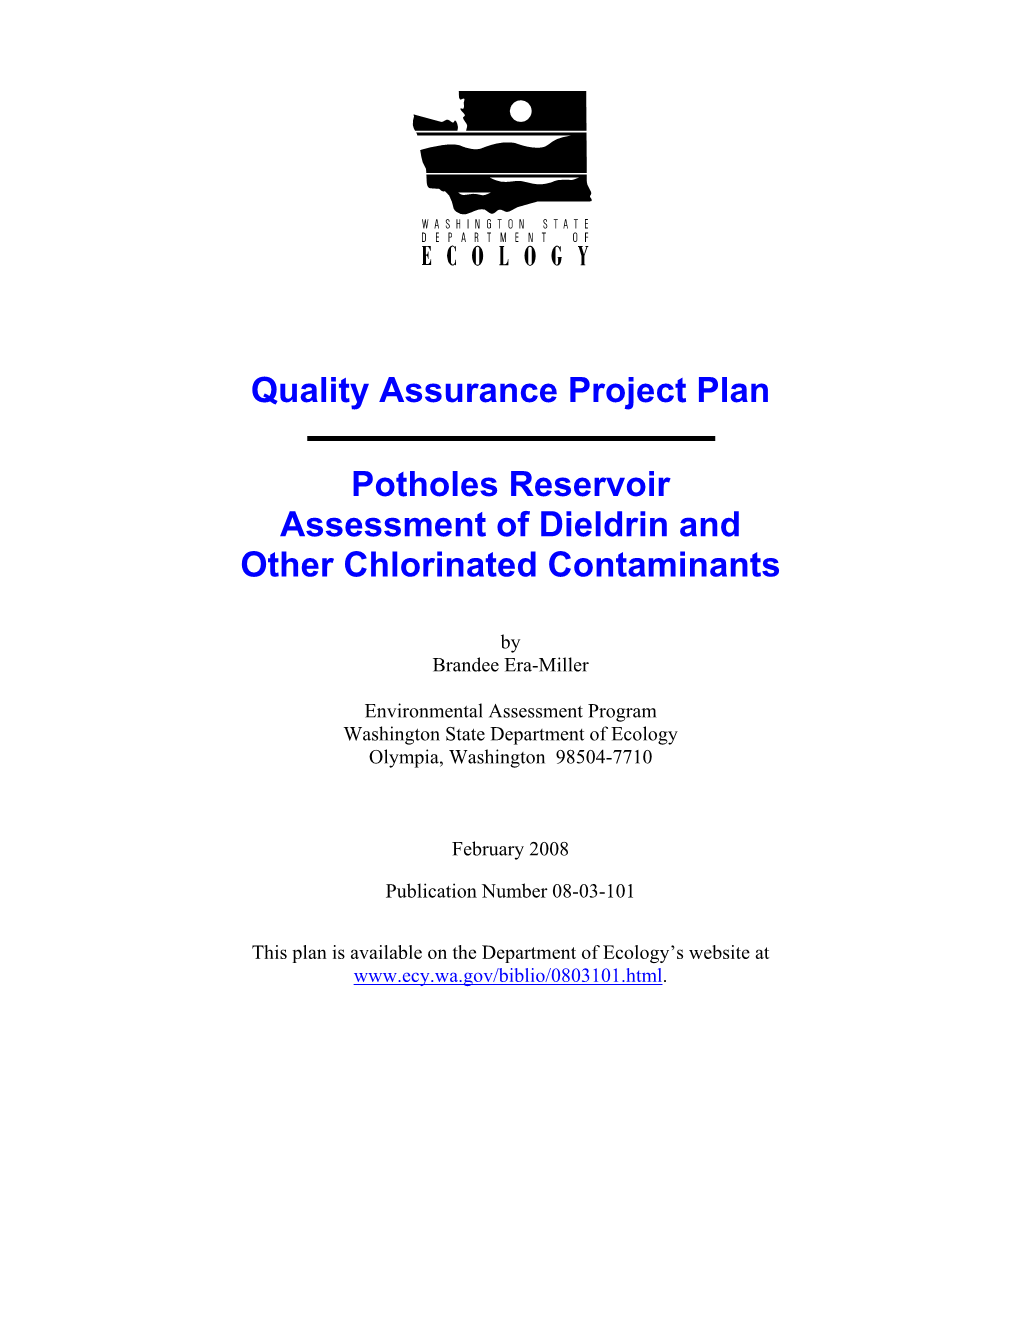 Potholes Reservoir Assessment of Dieldrin and Other Chlorinated Contaminants